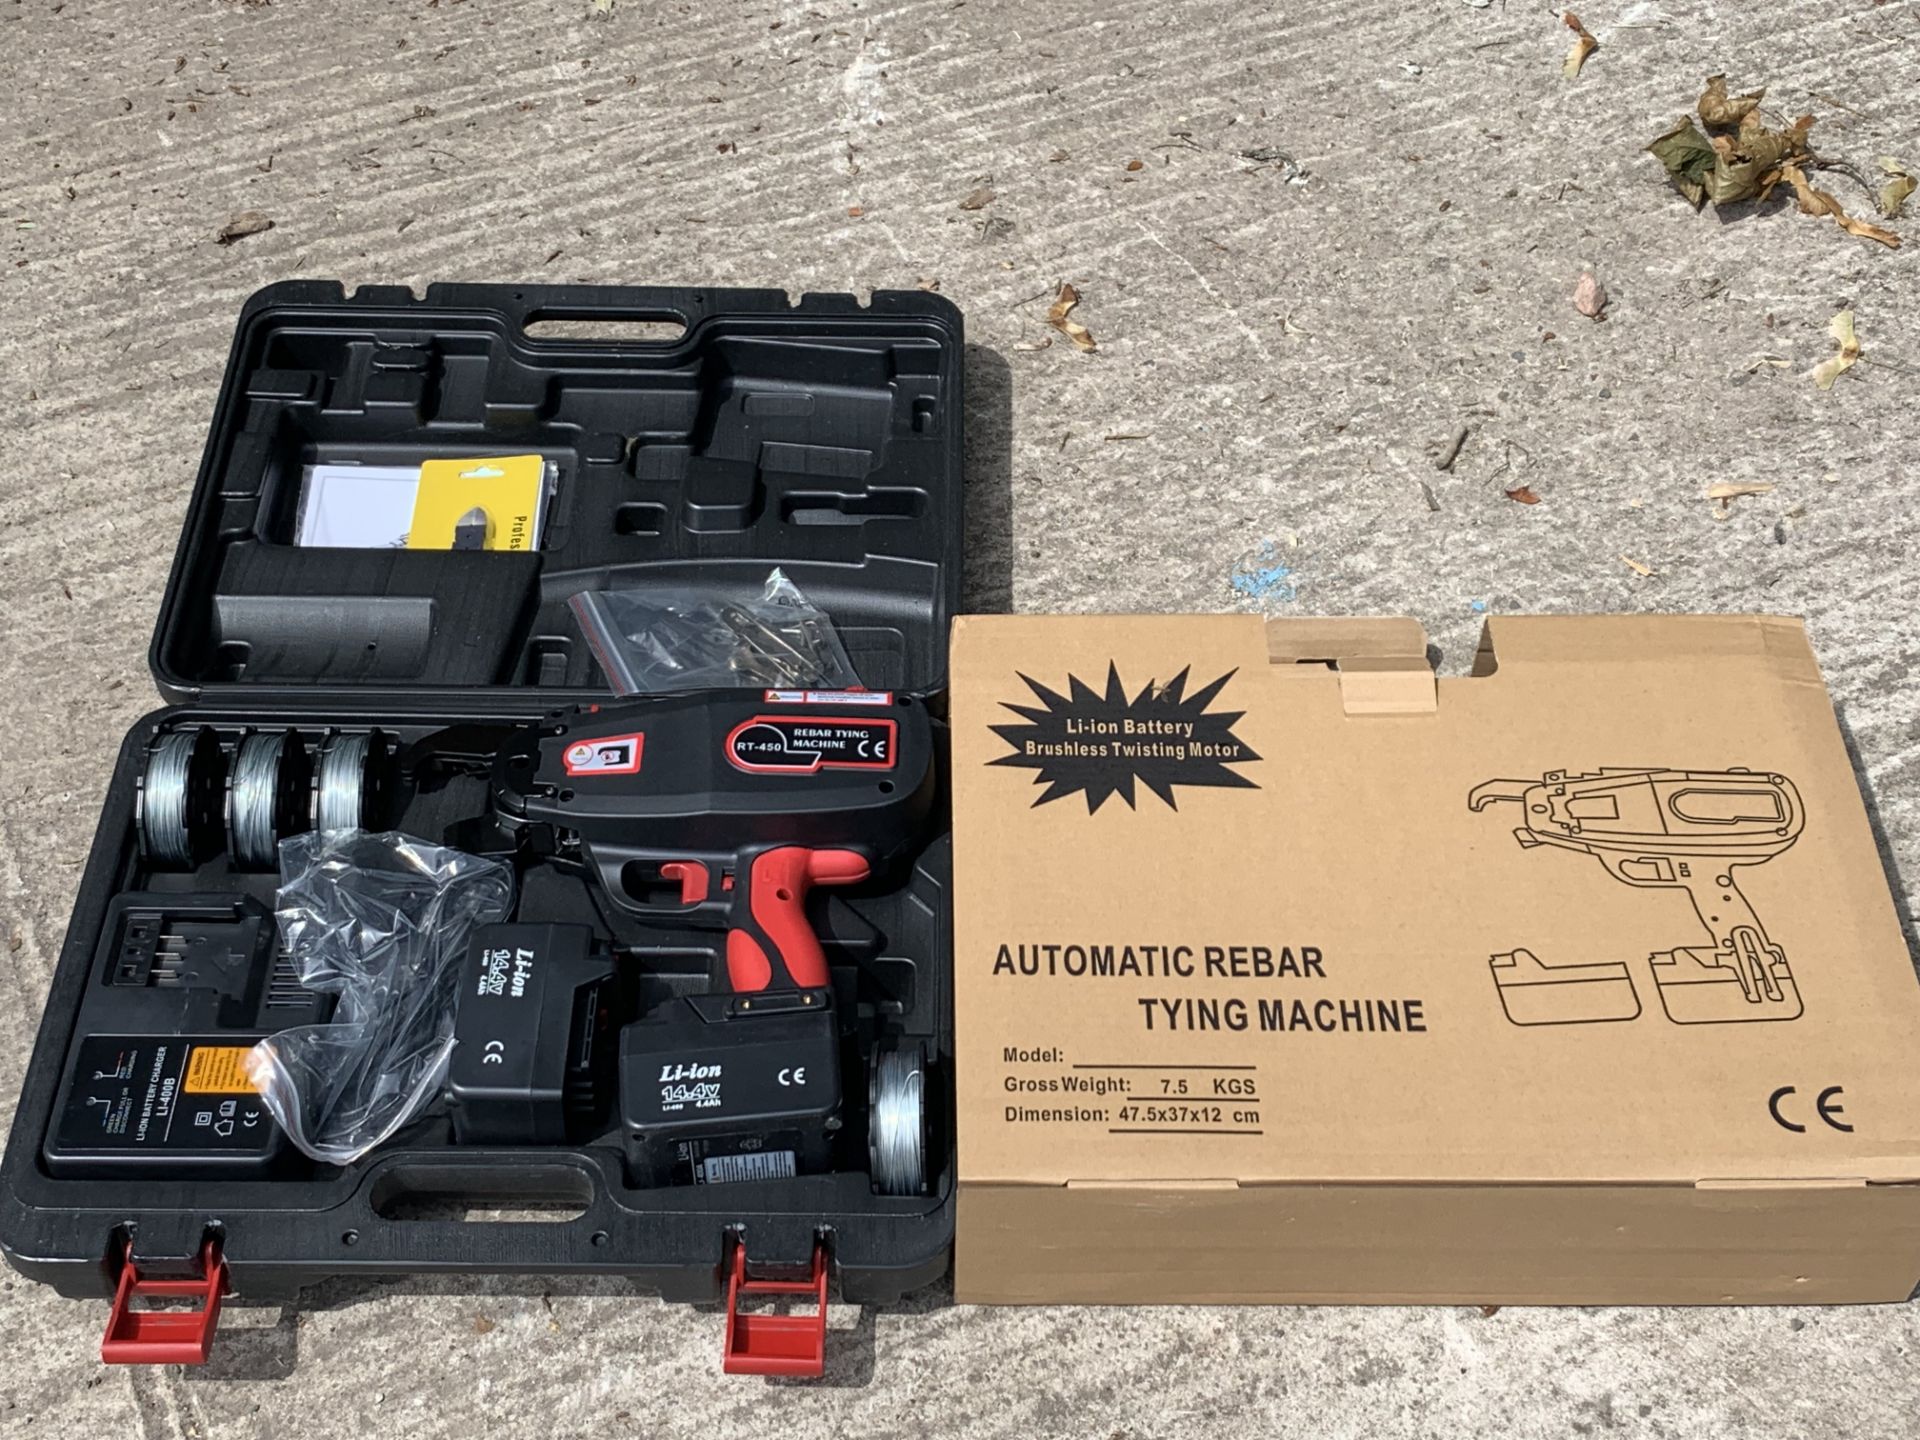 NEW BOXED RT-450 Automatic Cordless Rebar Tier Machine range from 6-45mm max/2 p/c LION BATT/CHARGER